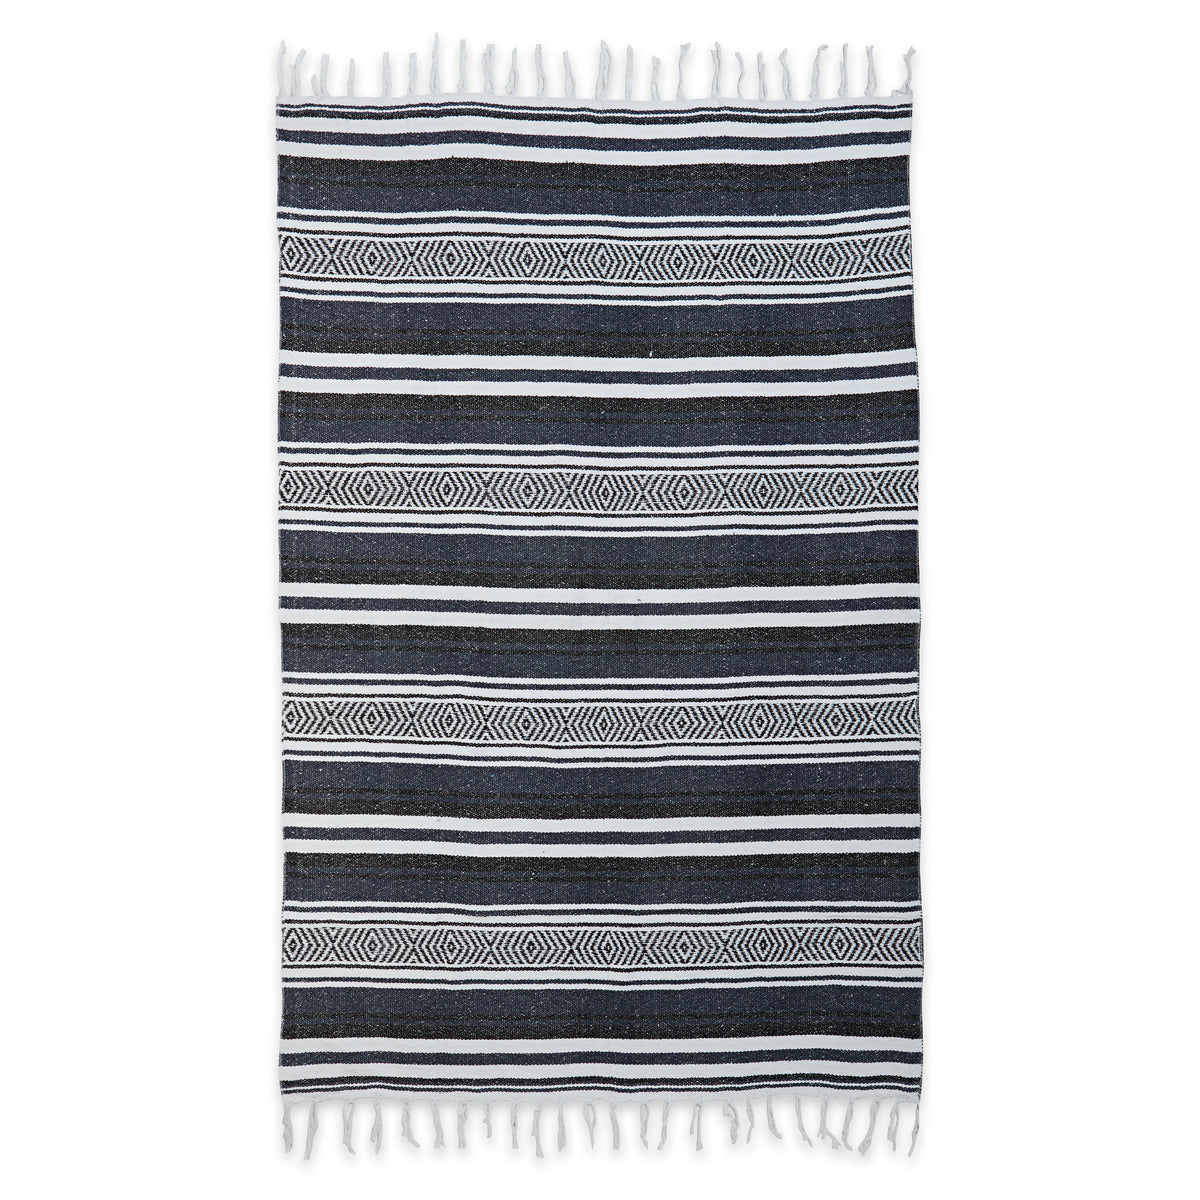 Traditional Mexican Woven Blanket Navy/Black flat